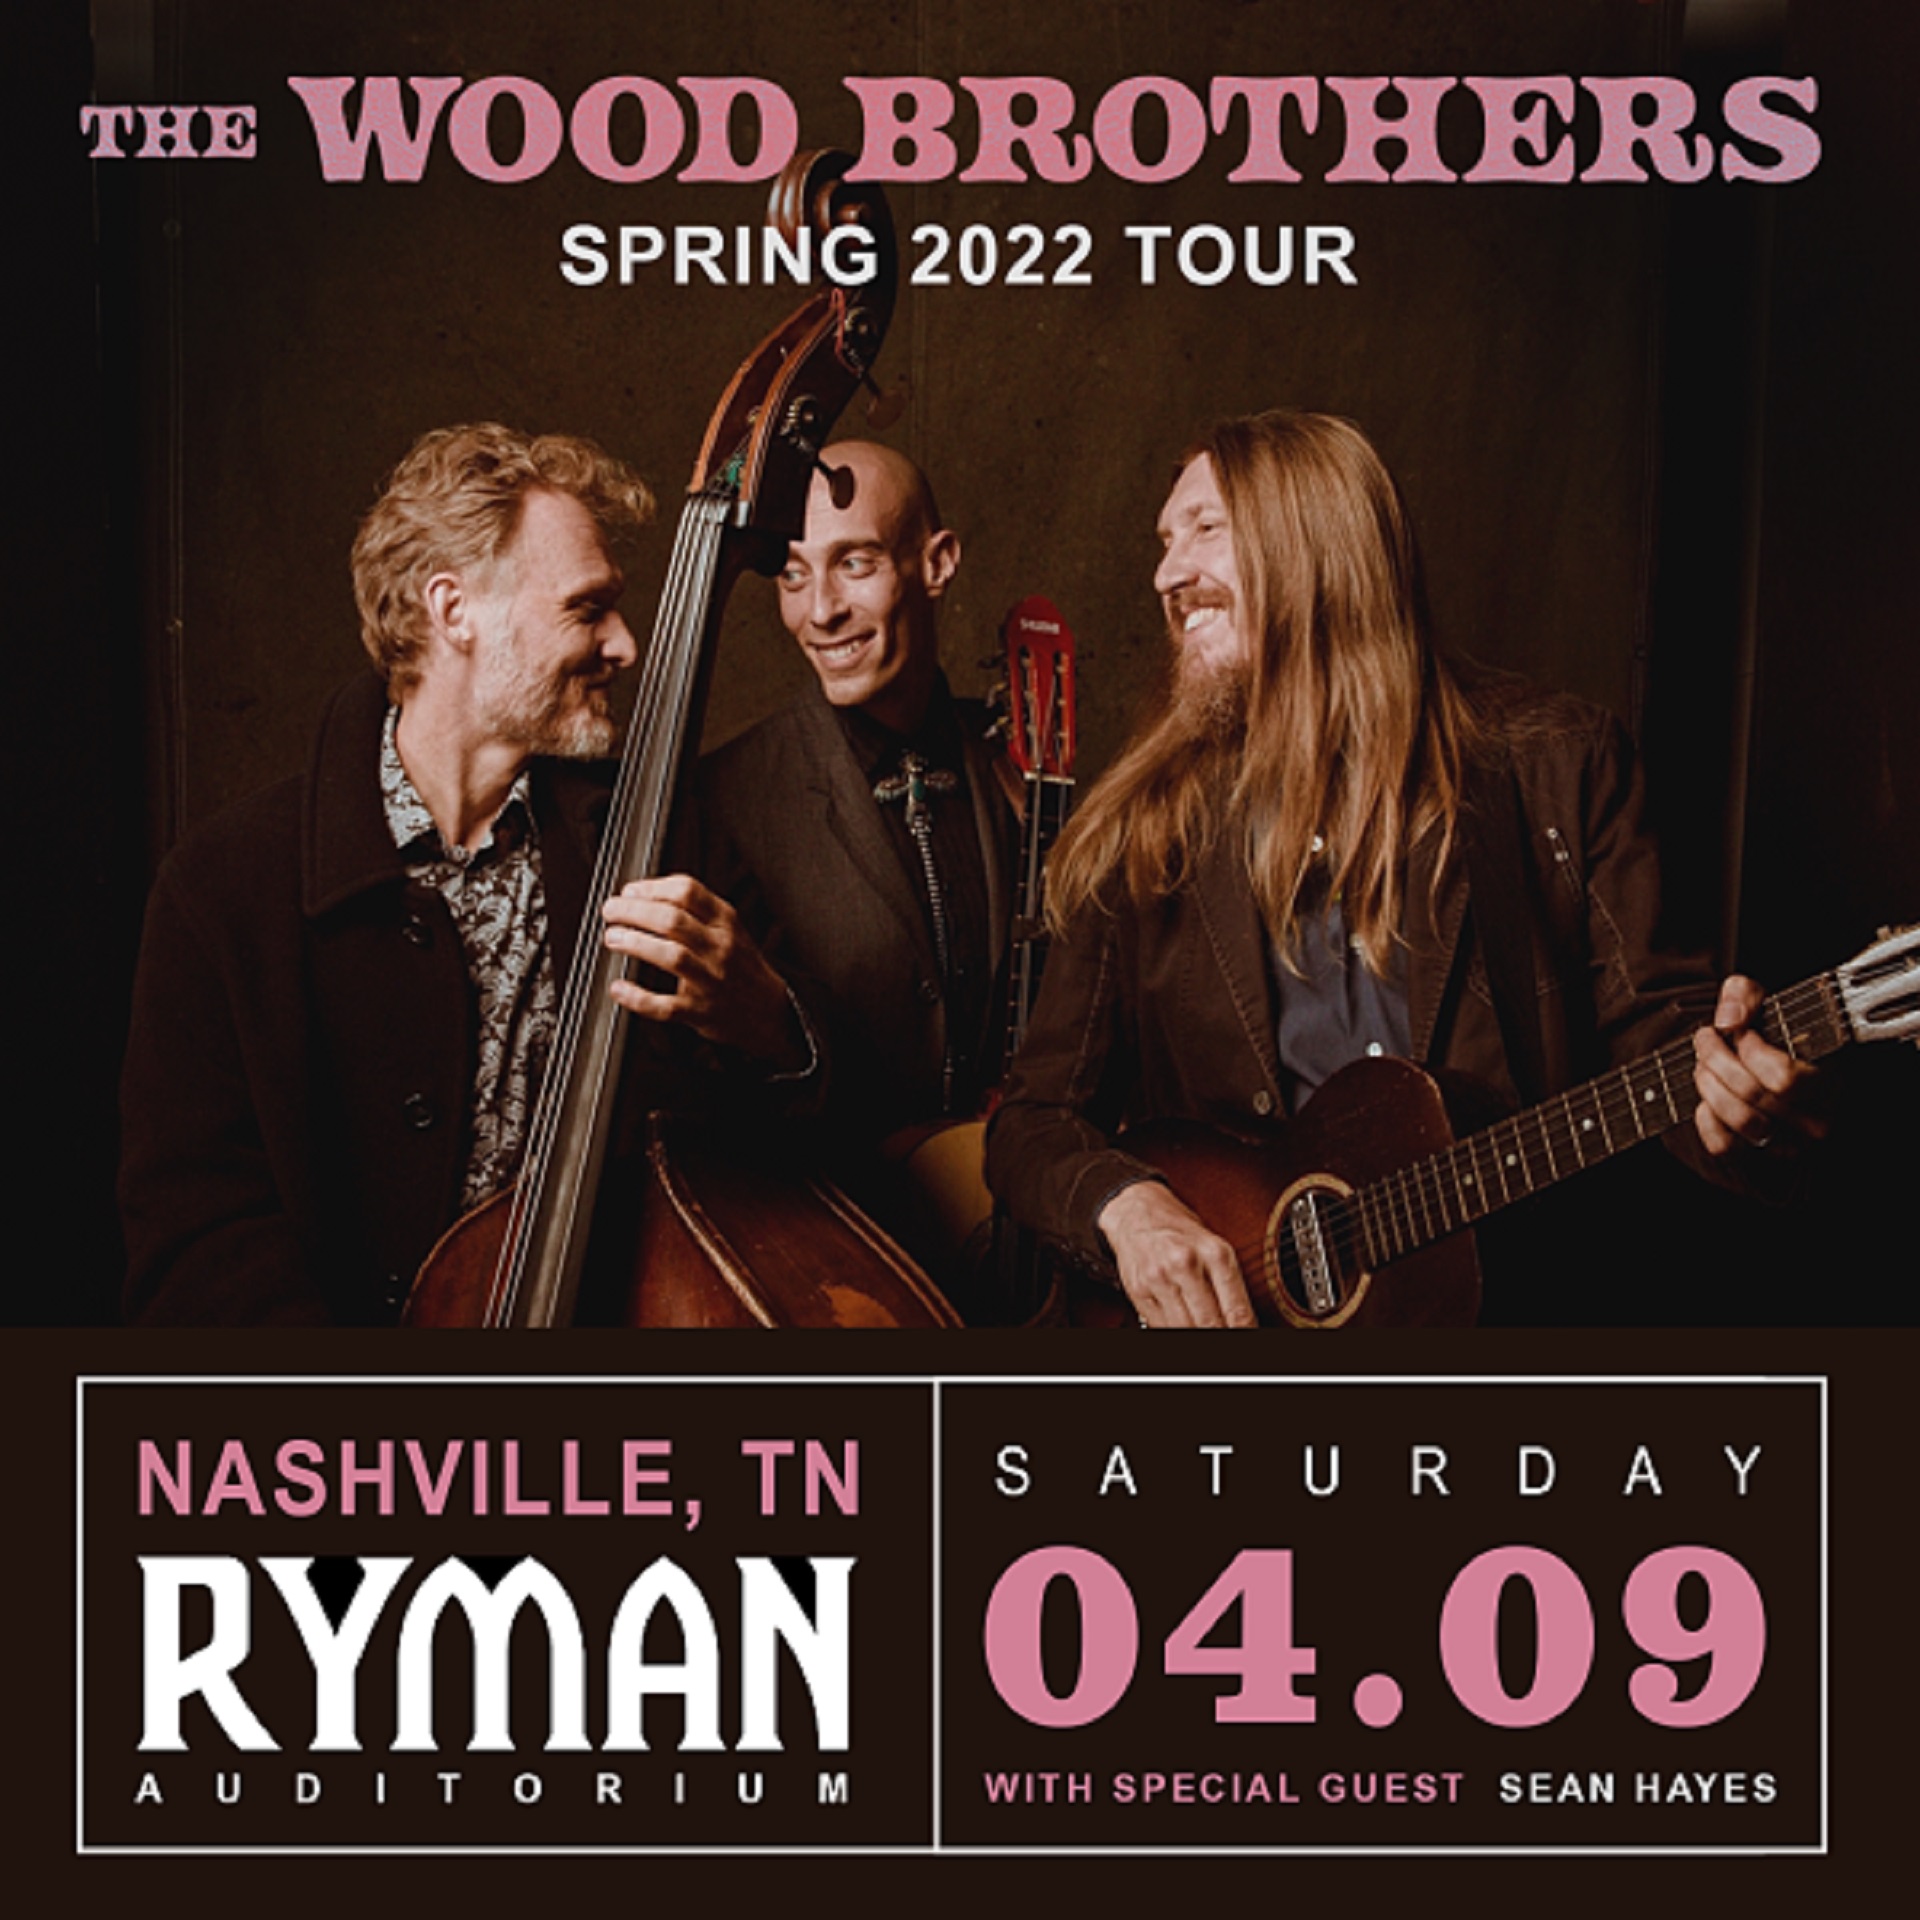 The Wood Brothers Extend 2022 Tour Dates Including Ryman Auditorium on 4/9